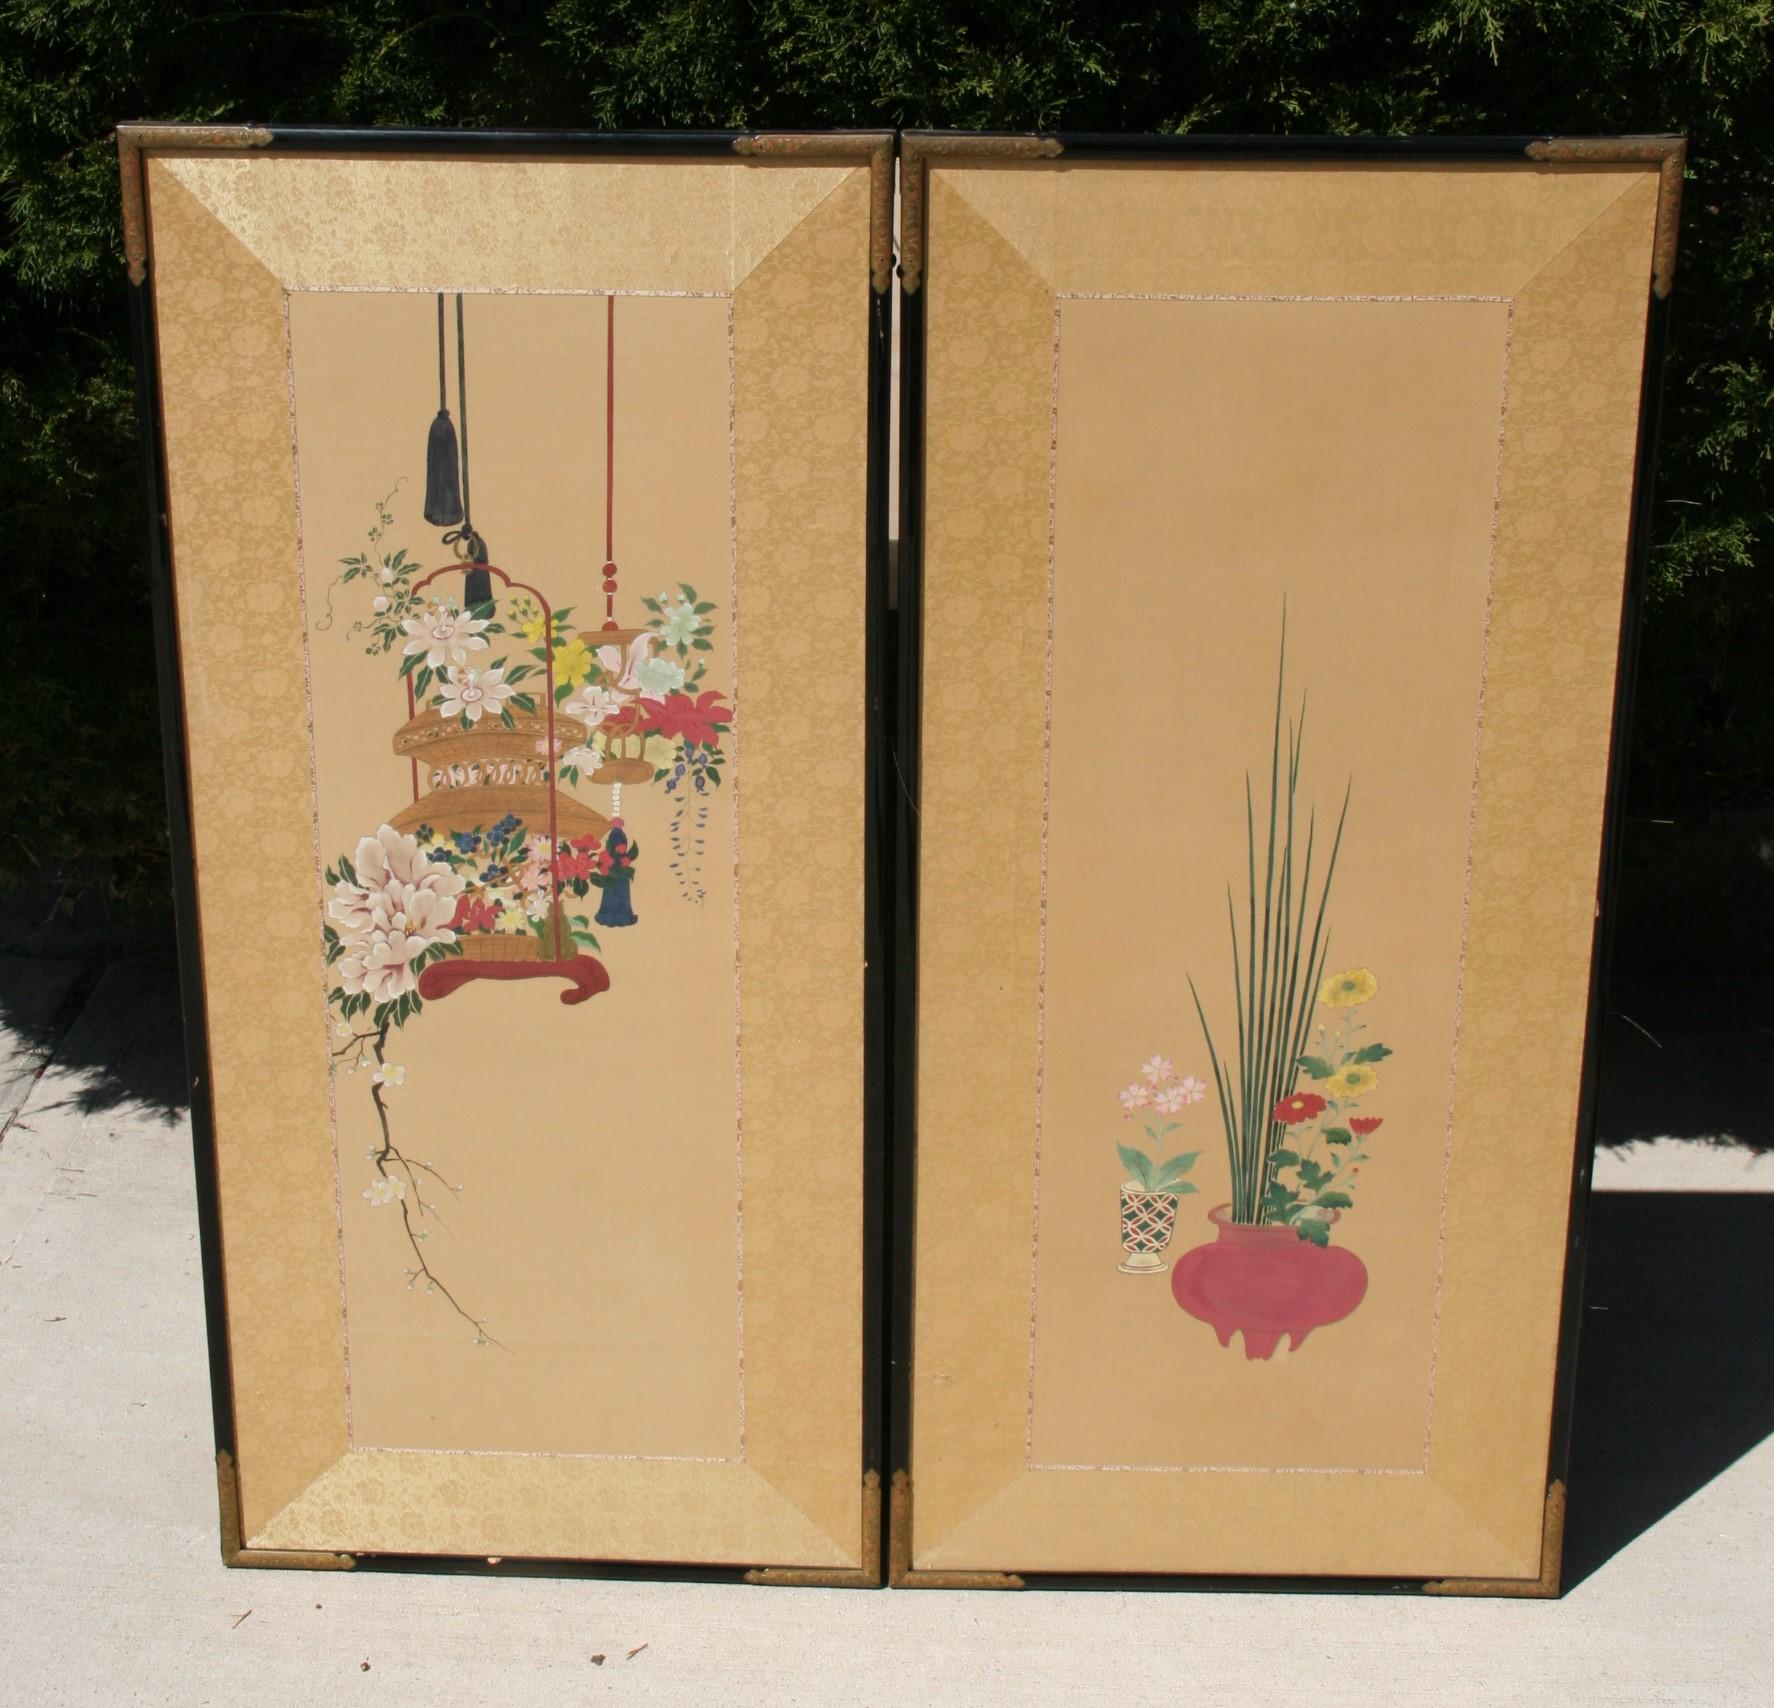 3-500 pair hand painted Japanese  panels/screens
Measures: Individual panel 20.5 x 44
Together 41 x 44